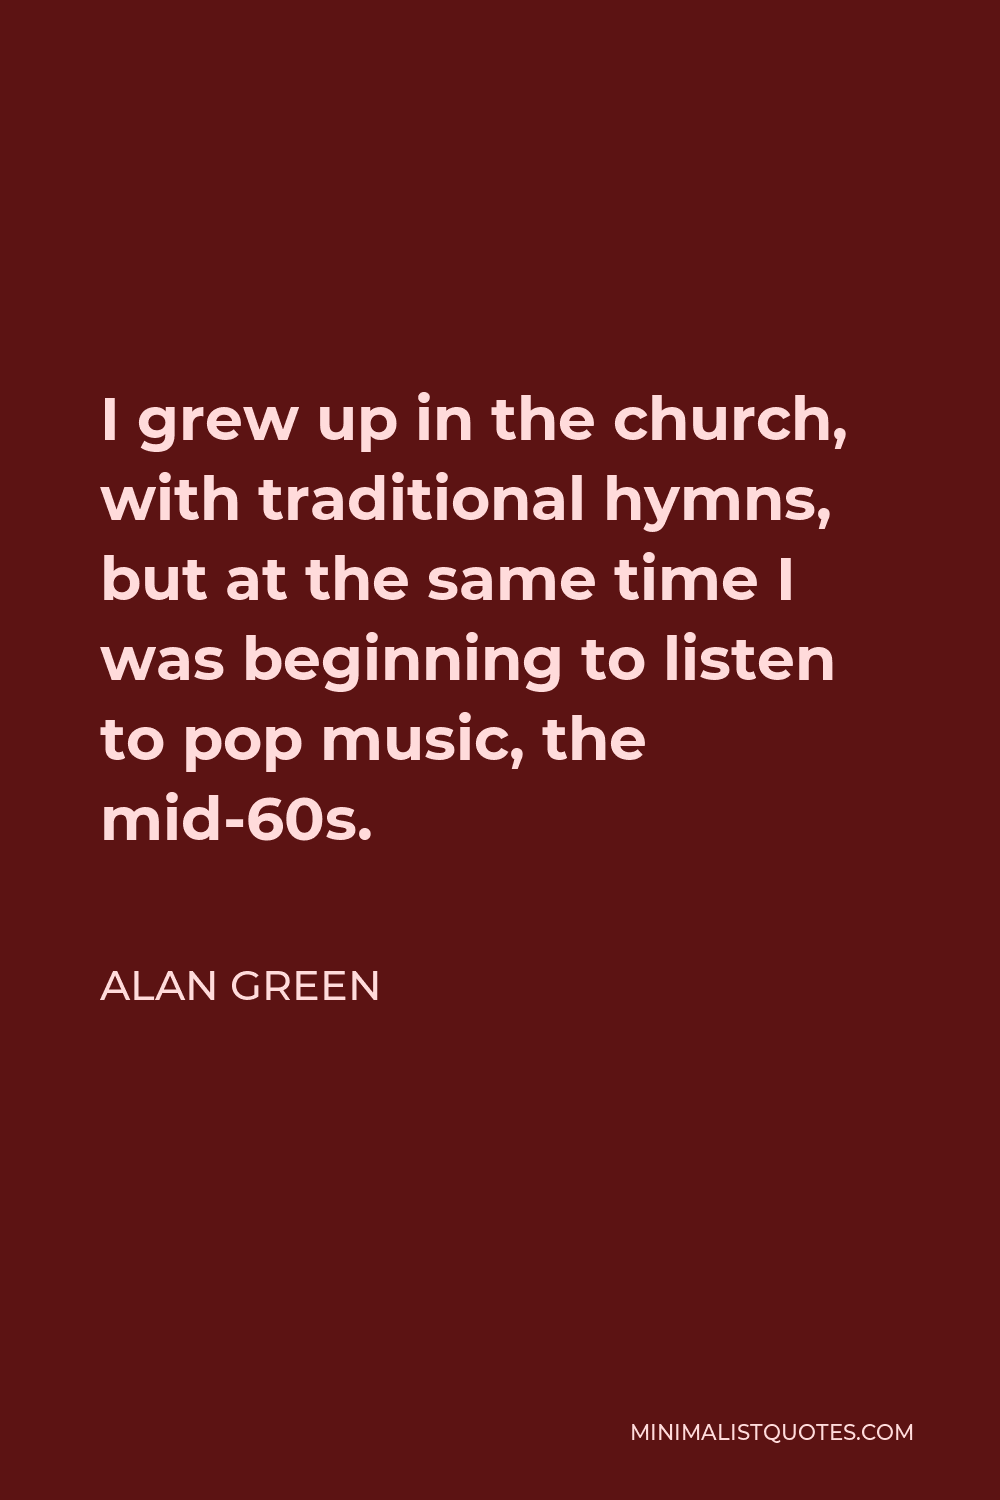 Alan Green Quote - I grew up in the church, with traditional hymns, but at the same time I was beginning to listen to pop music, the mid-60s.